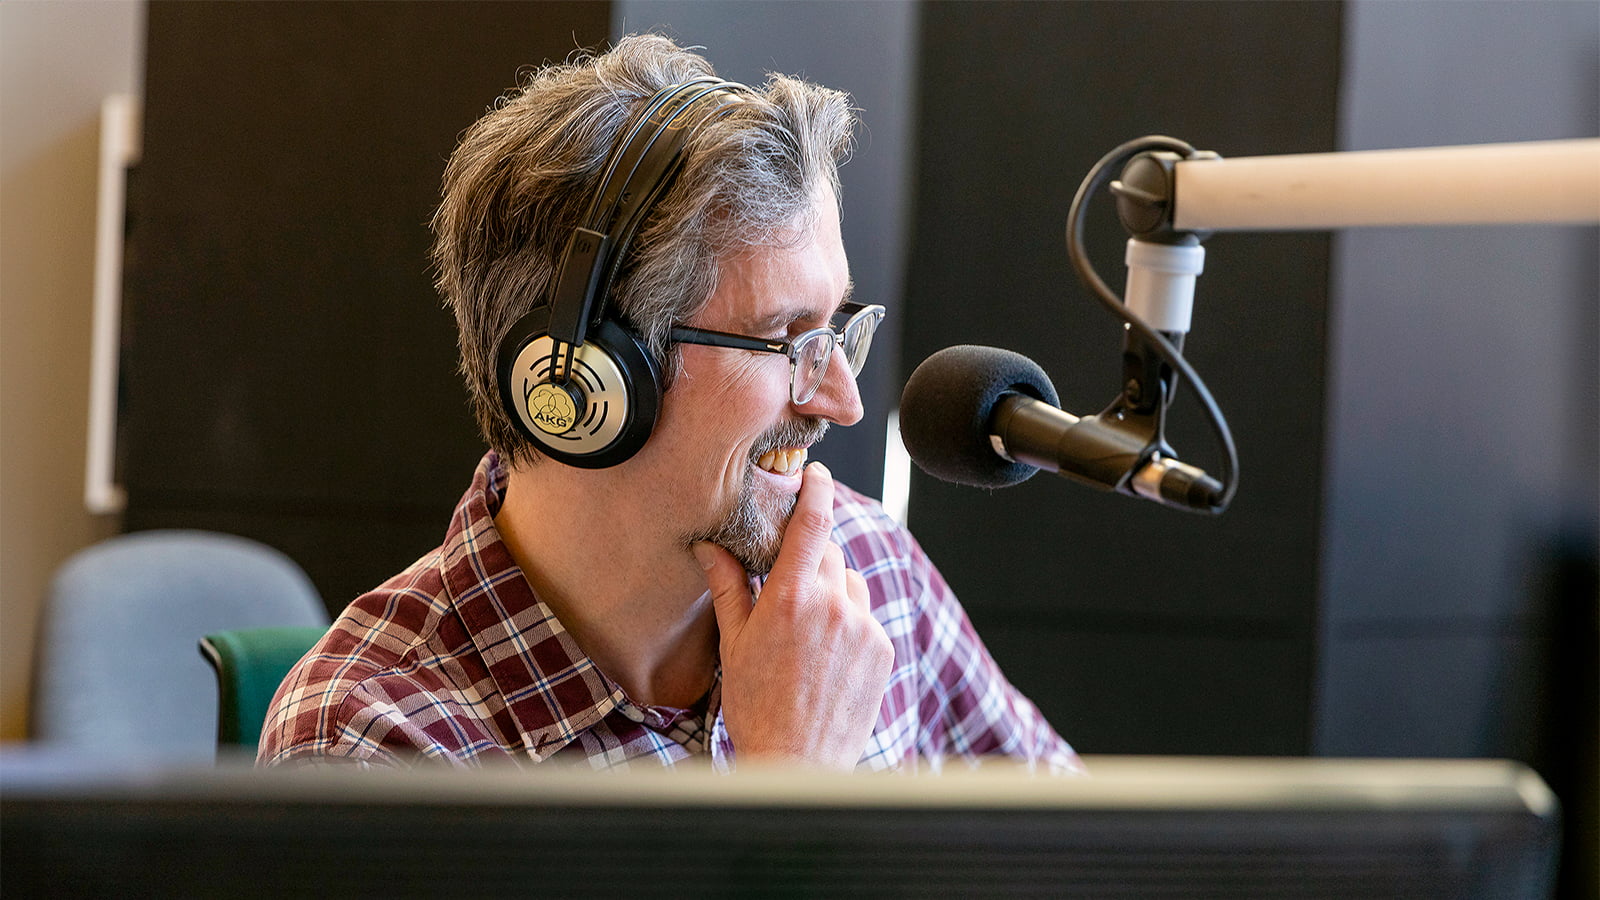 CKUA host Grant Stovel says the public broadcaster offers listeners a distinctive mix of entertainment, education and community connection. (Photo courtesy CKUA)